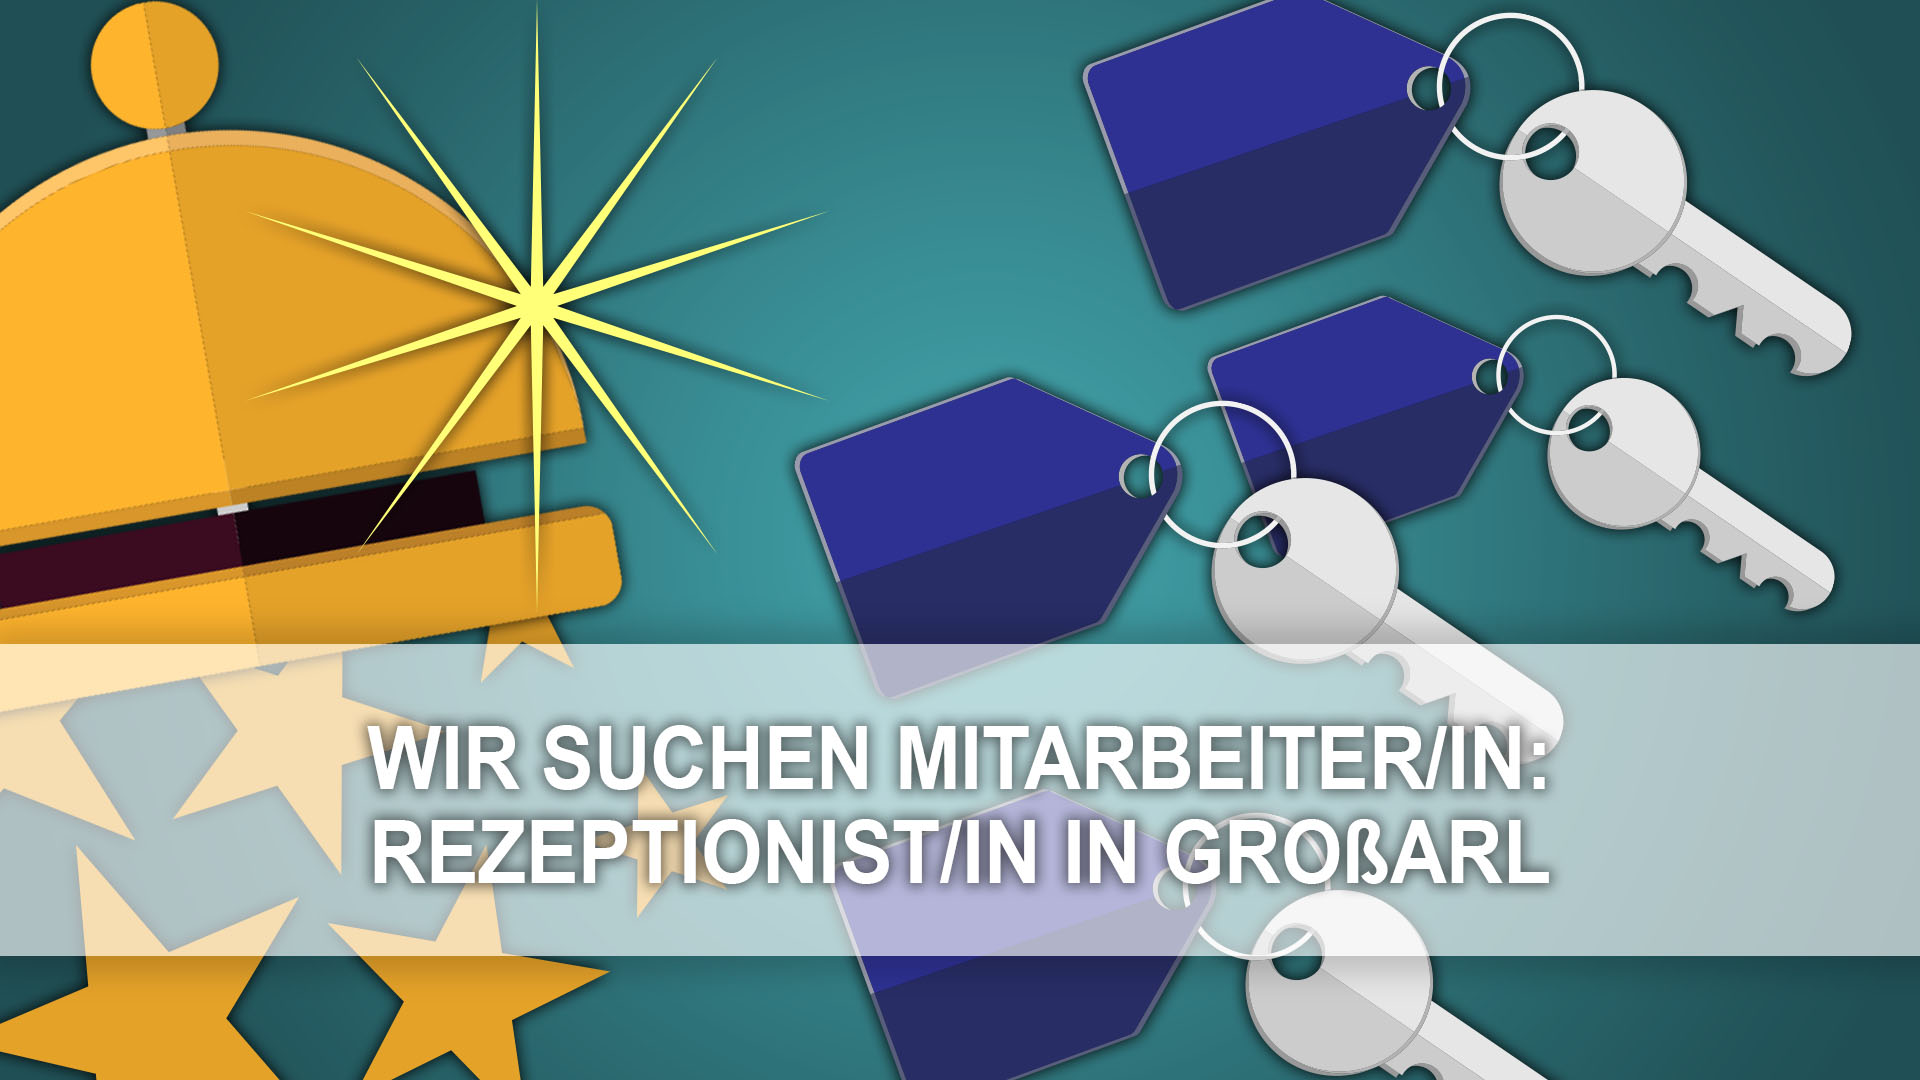 You are currently viewing Rezeptionist/in gesucht!